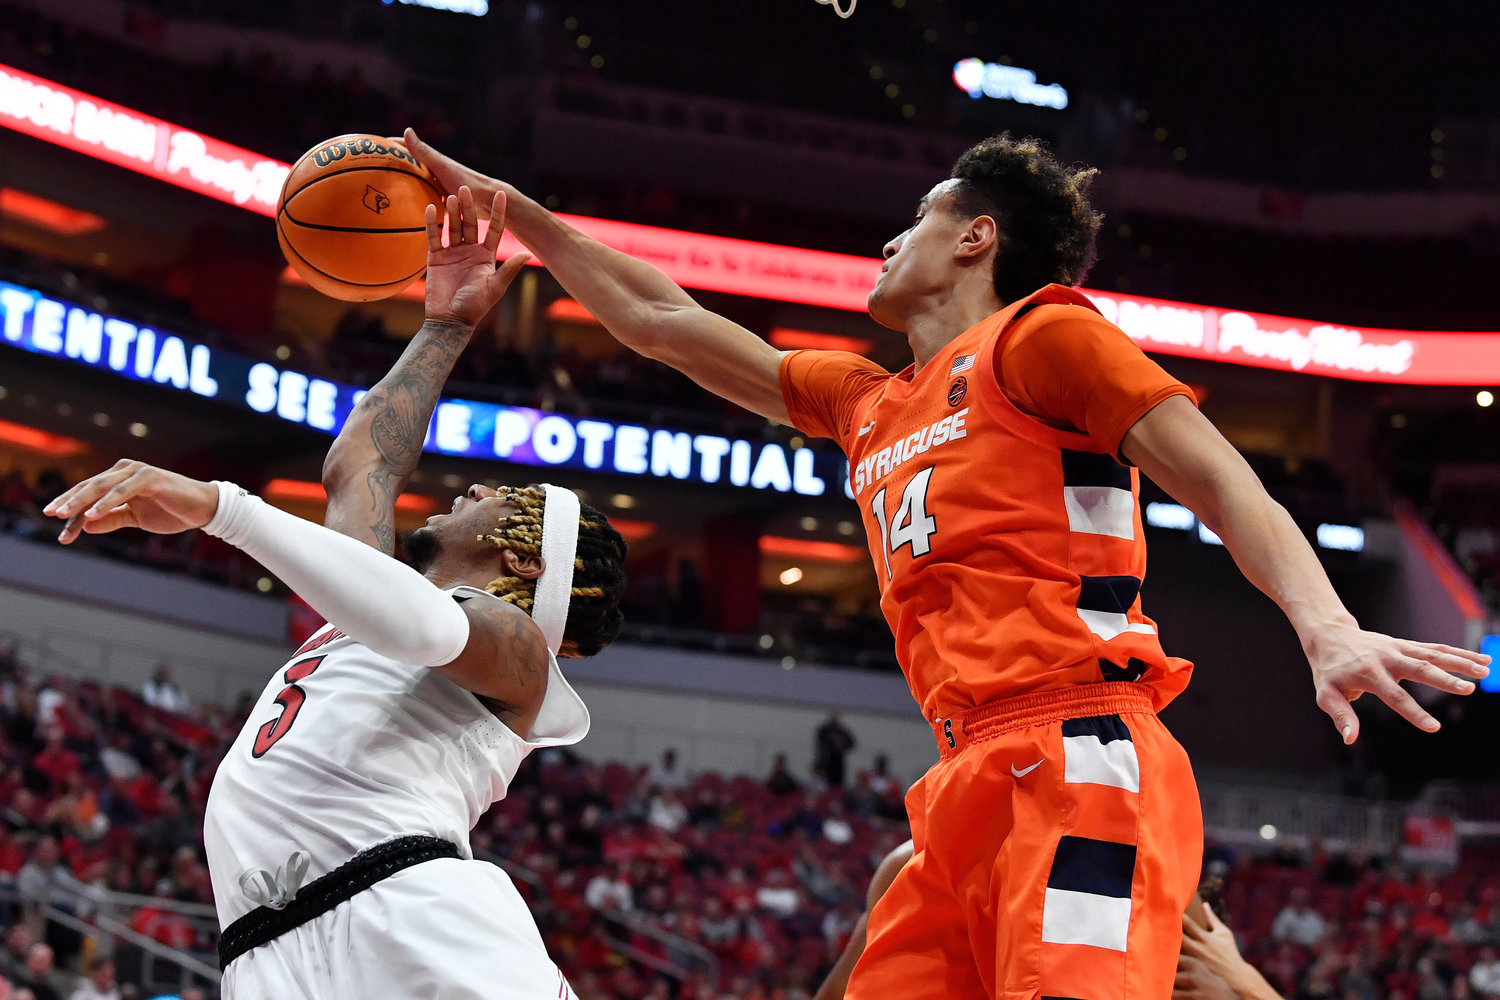 Syracuse center Jesse Edwards (14) blocks the shot of Louisville guard El Ellis (3) during the second half of Tuesday night's game in Louisville, Ky. Syracuse won 70-69.